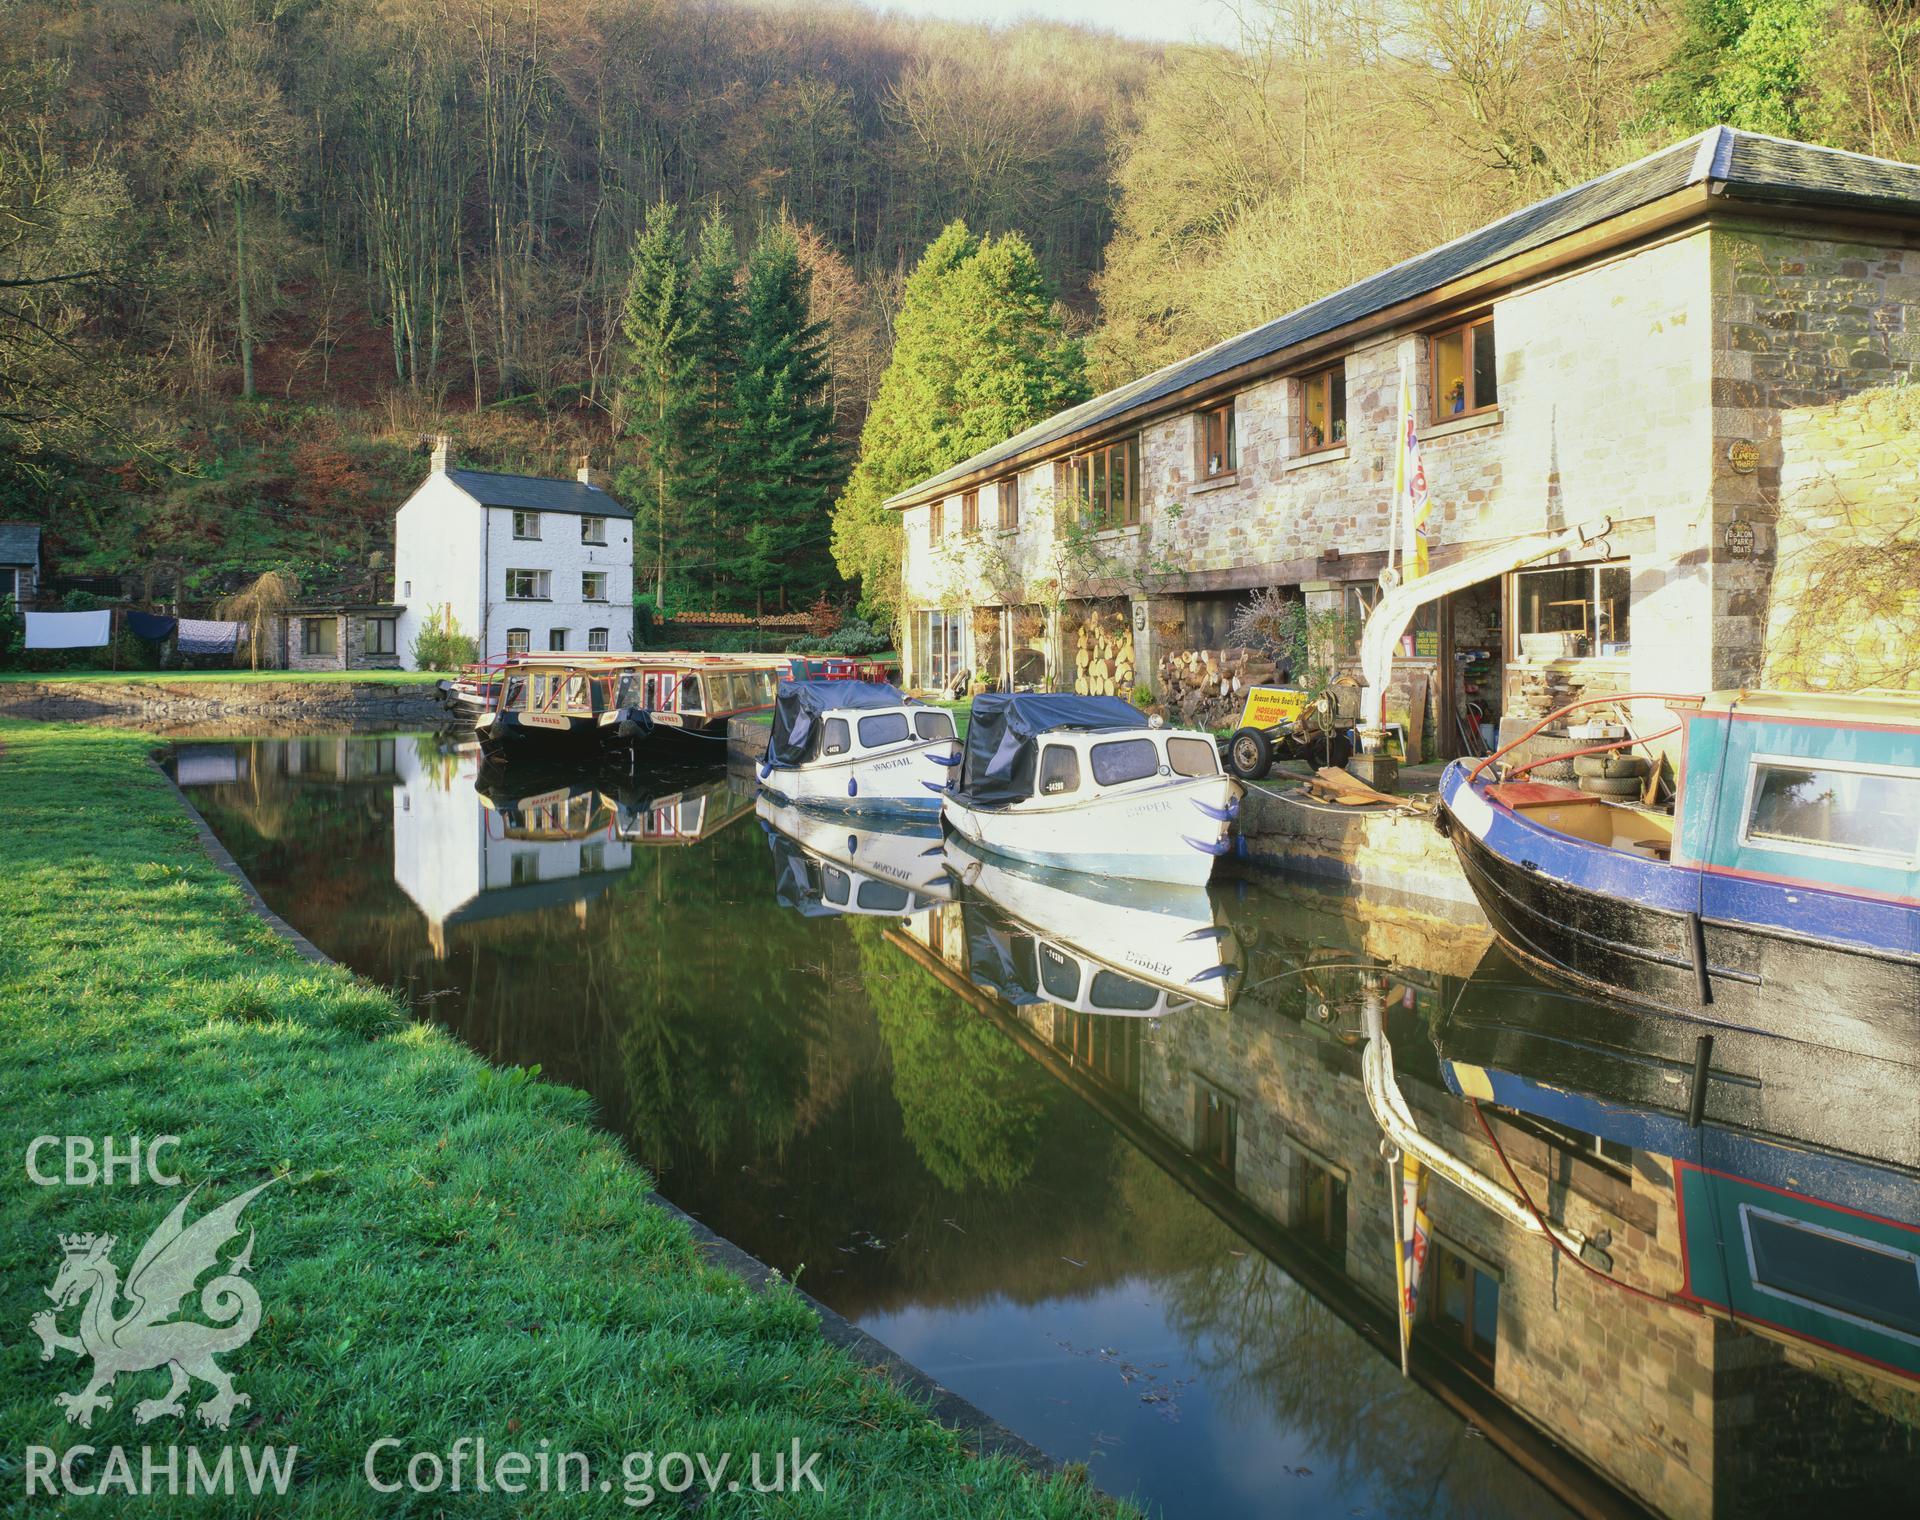 RCAHMW colour transparency showing view of Llanfoist Wharf.